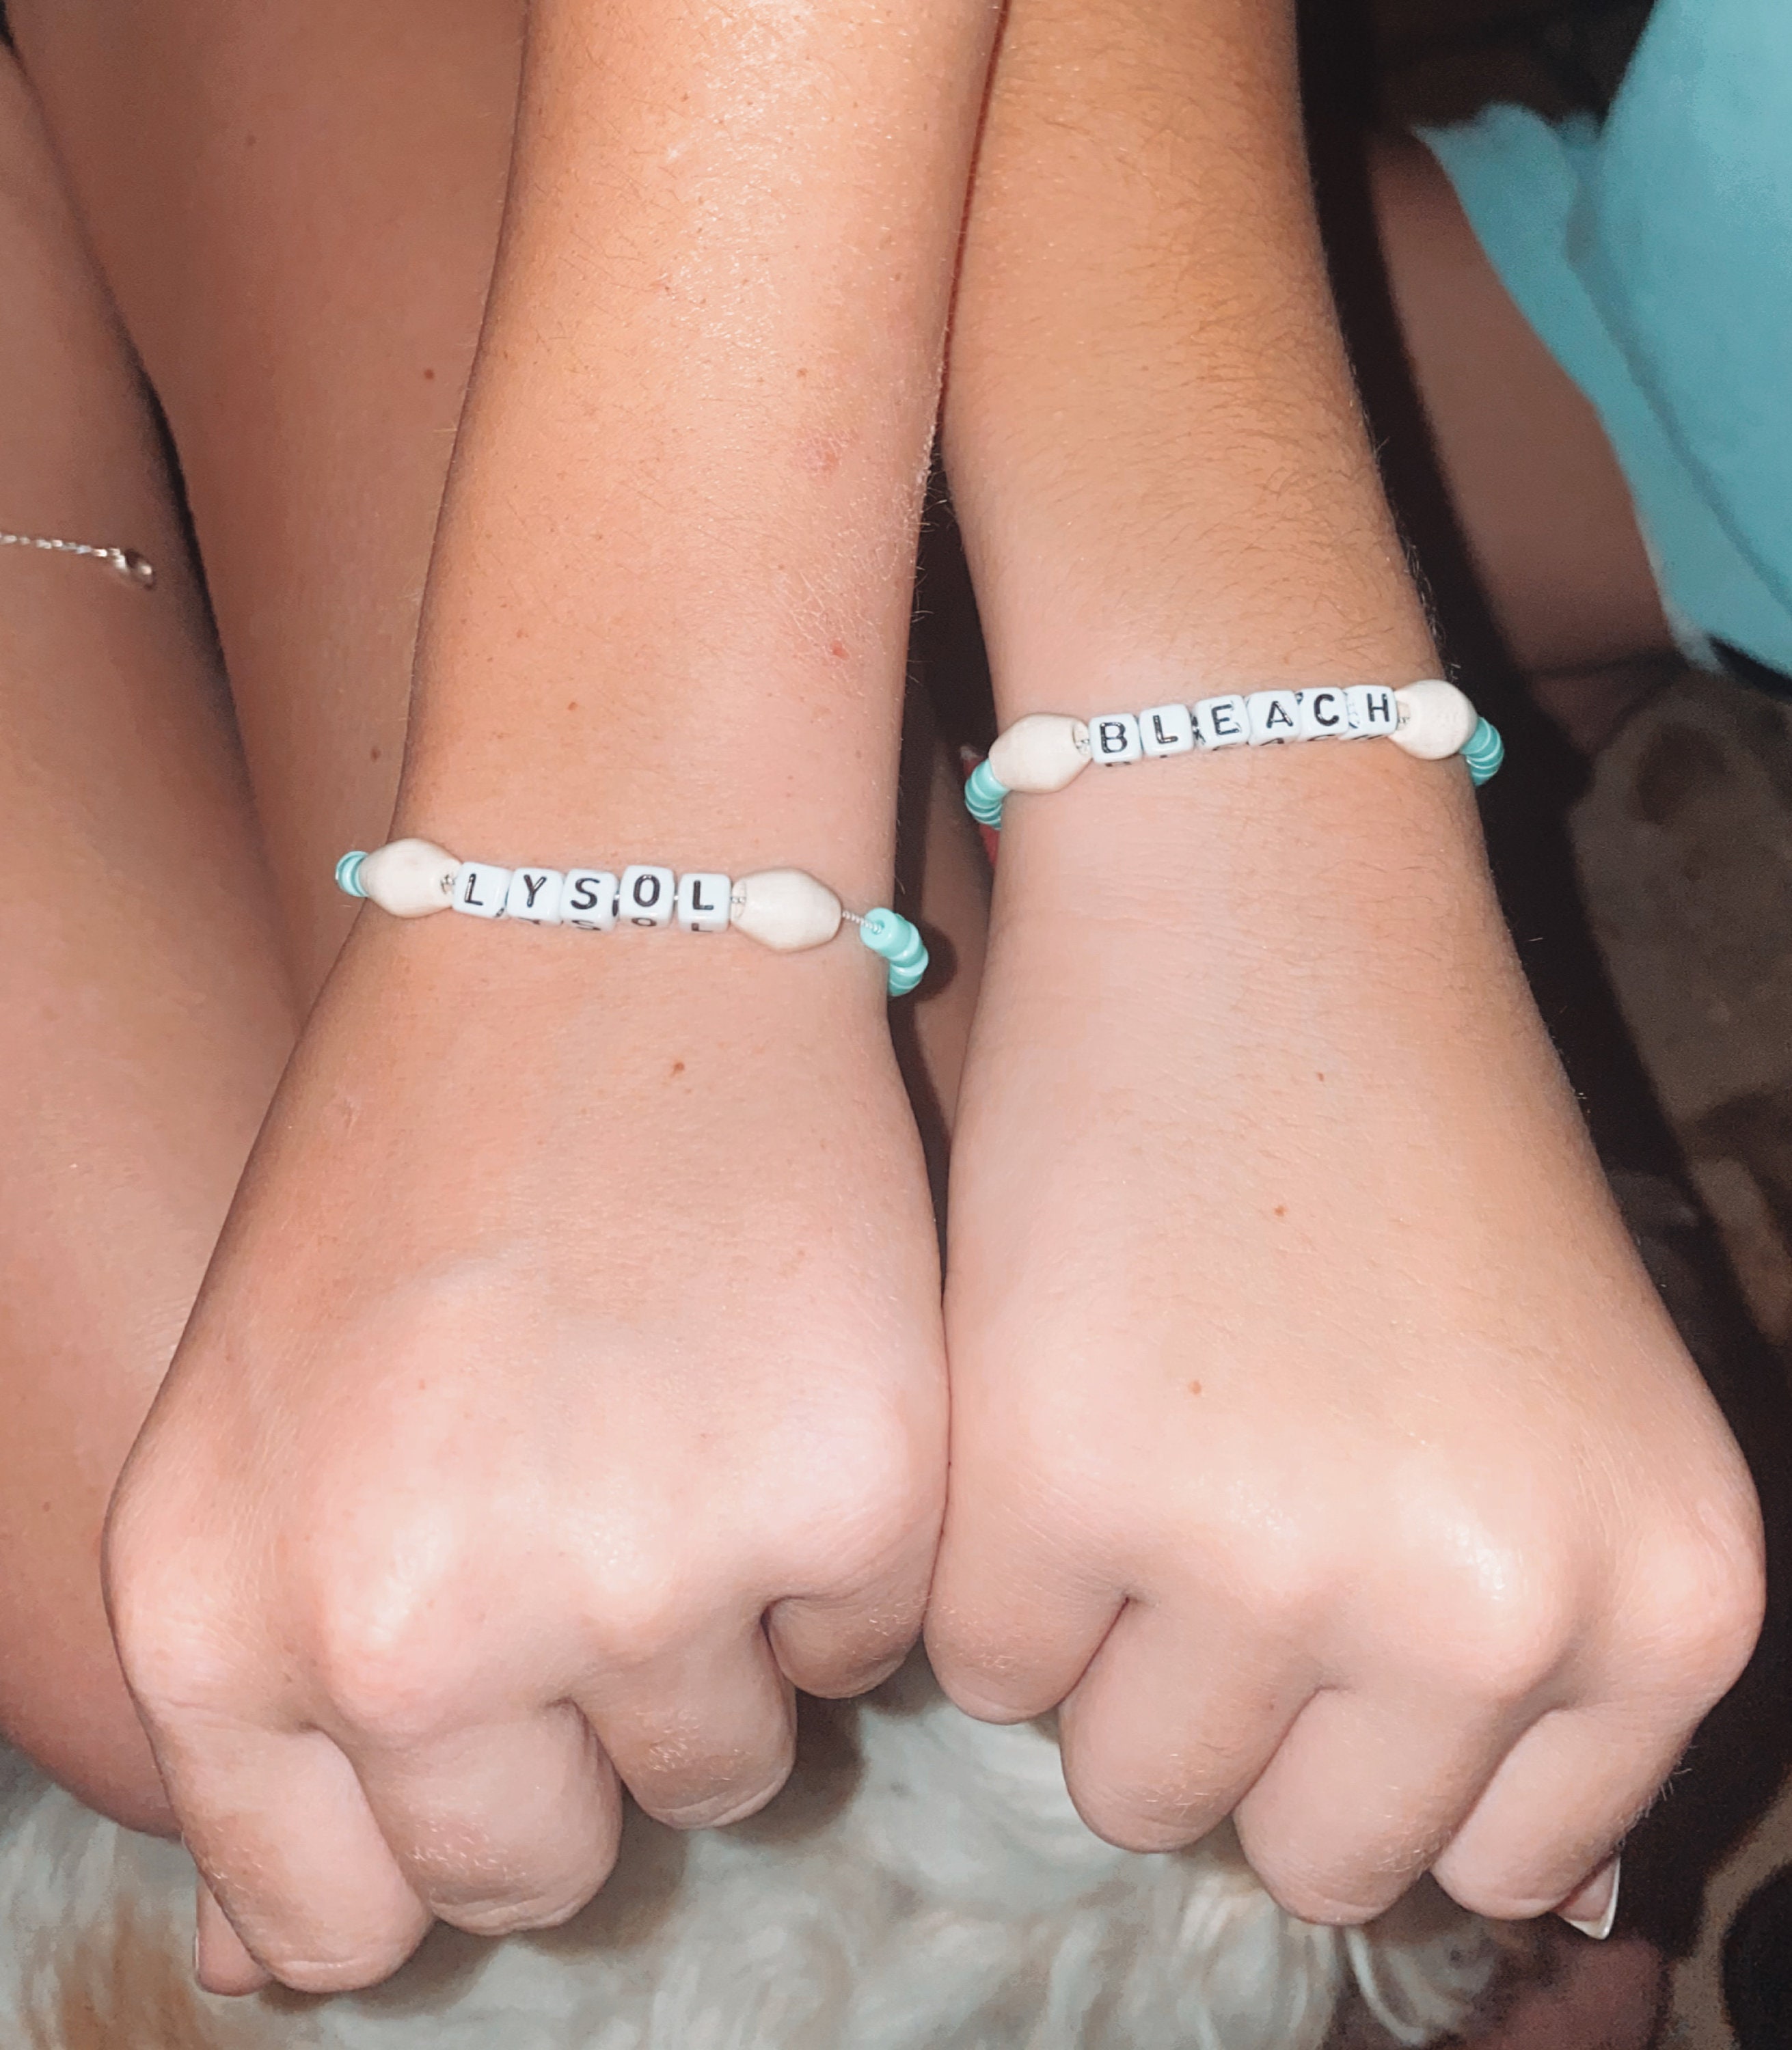 VSCO Girls INS Basic Matching Clay Bead Bracelets With Lettering Hello Ciao  Bonjou String Bangle For Unisex Design In From Melody2041, $18.52 |  DHgate.Com